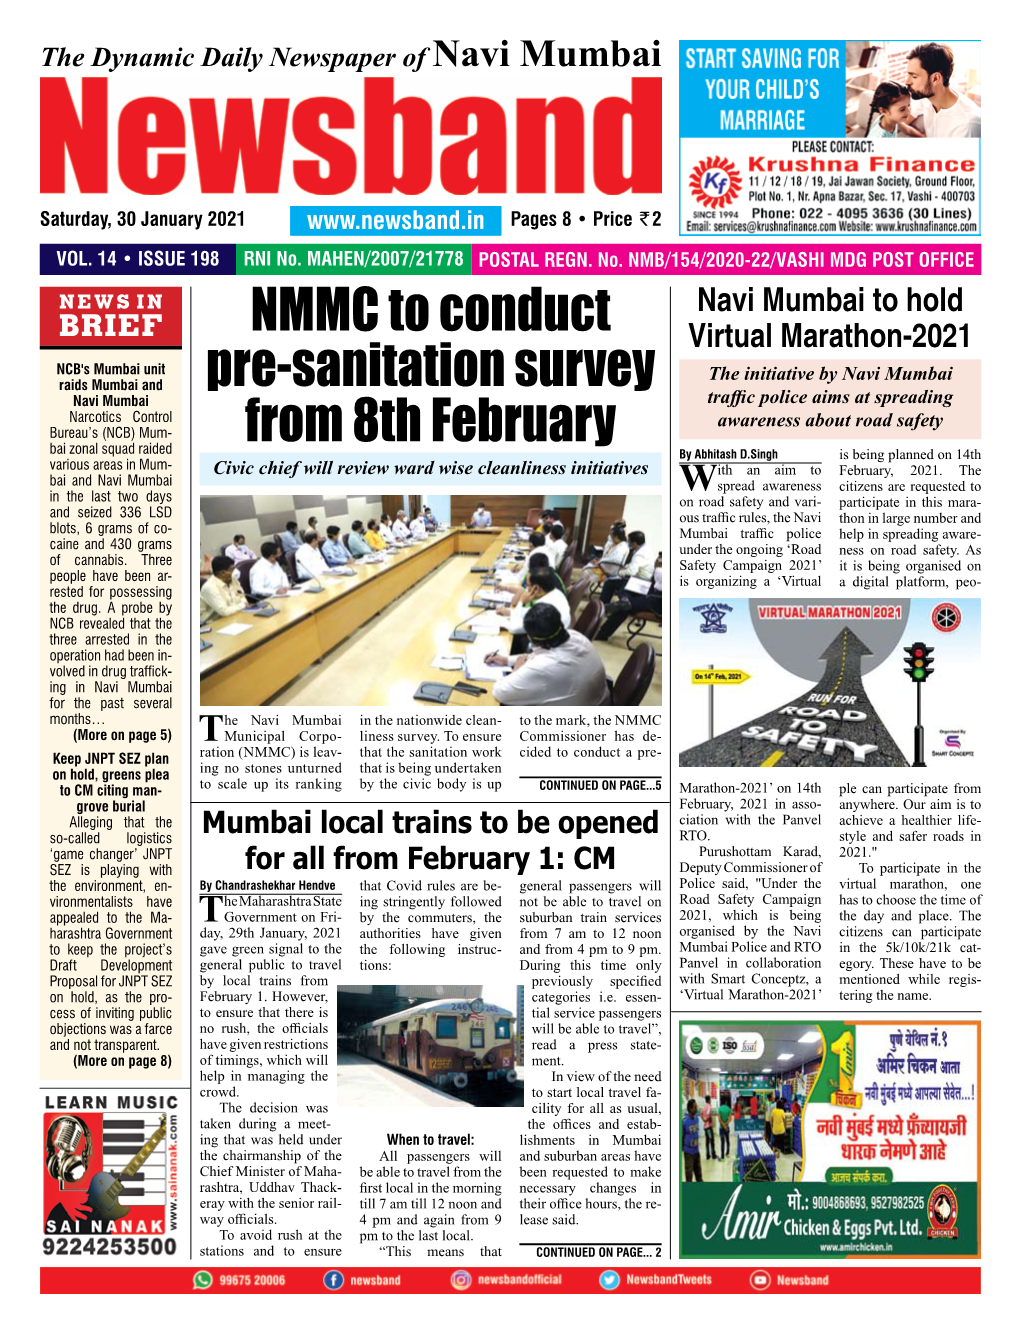 NMMC to Conduct Pre-Sanitation Survey from 8Th February